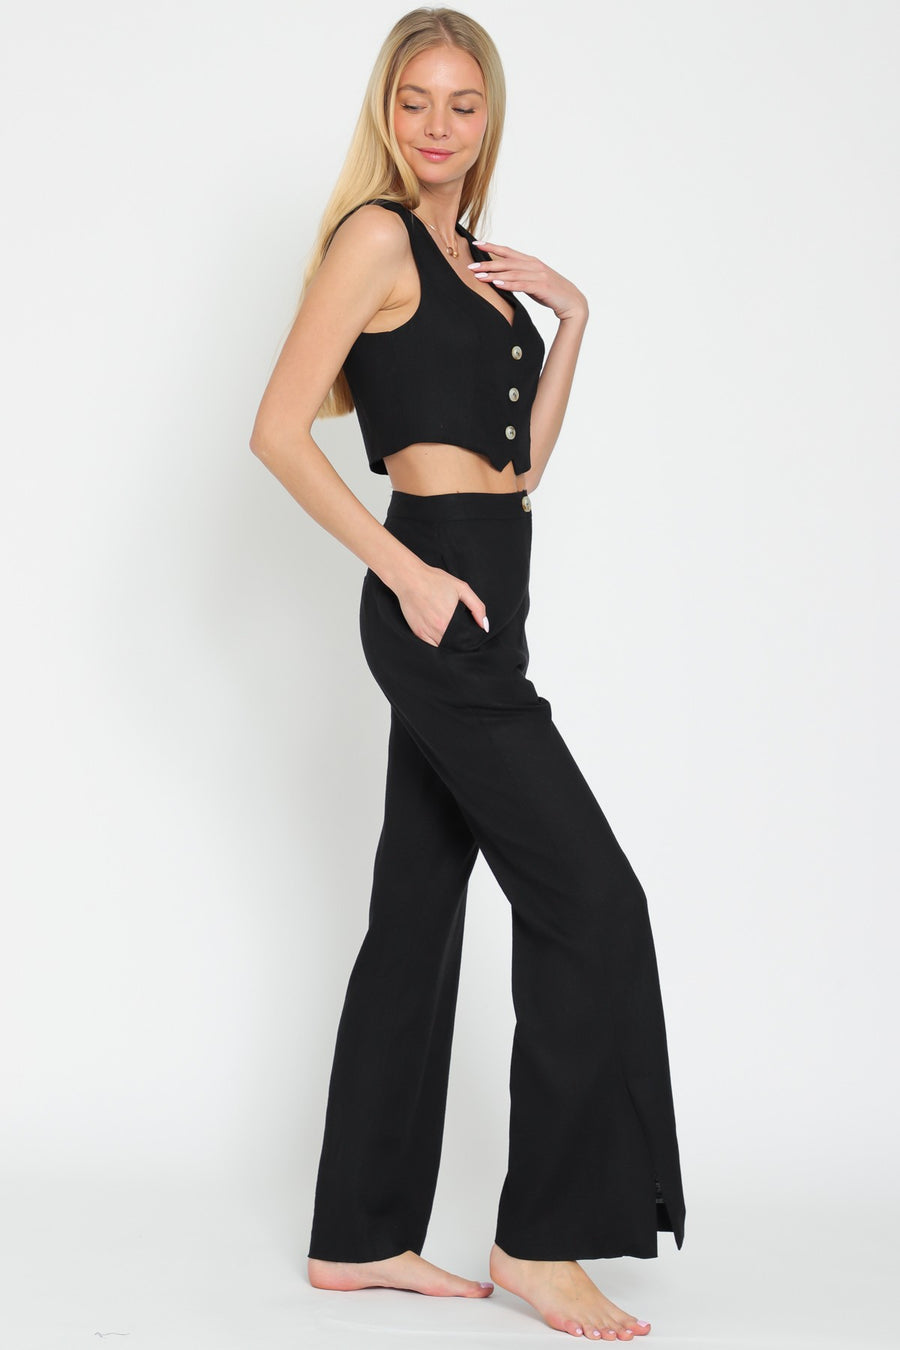 High waisted pants with pockets and button detail.